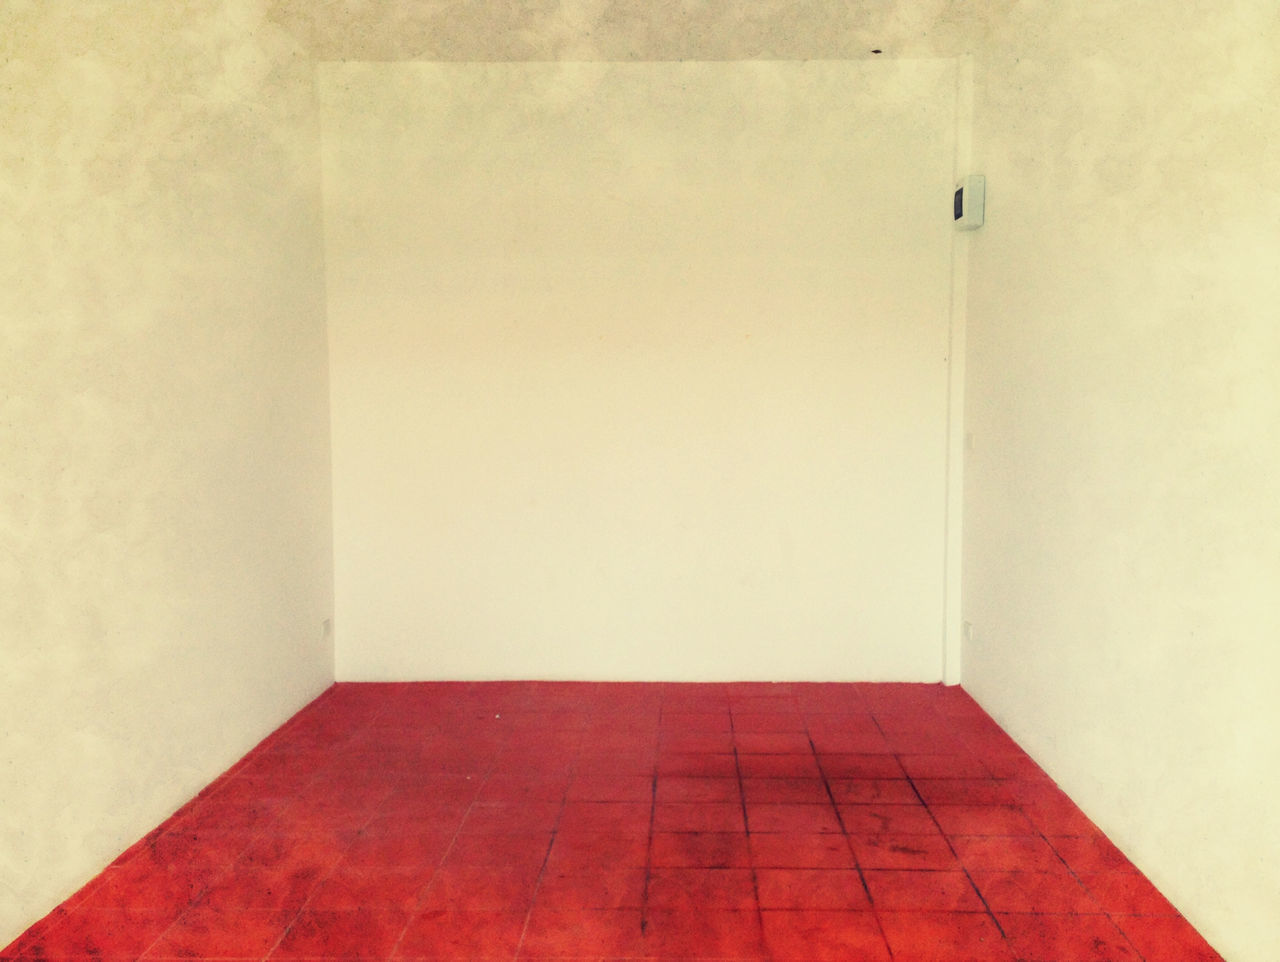 indoors, wall - building feature, architecture, built structure, tiled floor, wall, flooring, red, tile, copy space, door, no people, home interior, white color, pattern, shadow, day, corridor, absence, empty